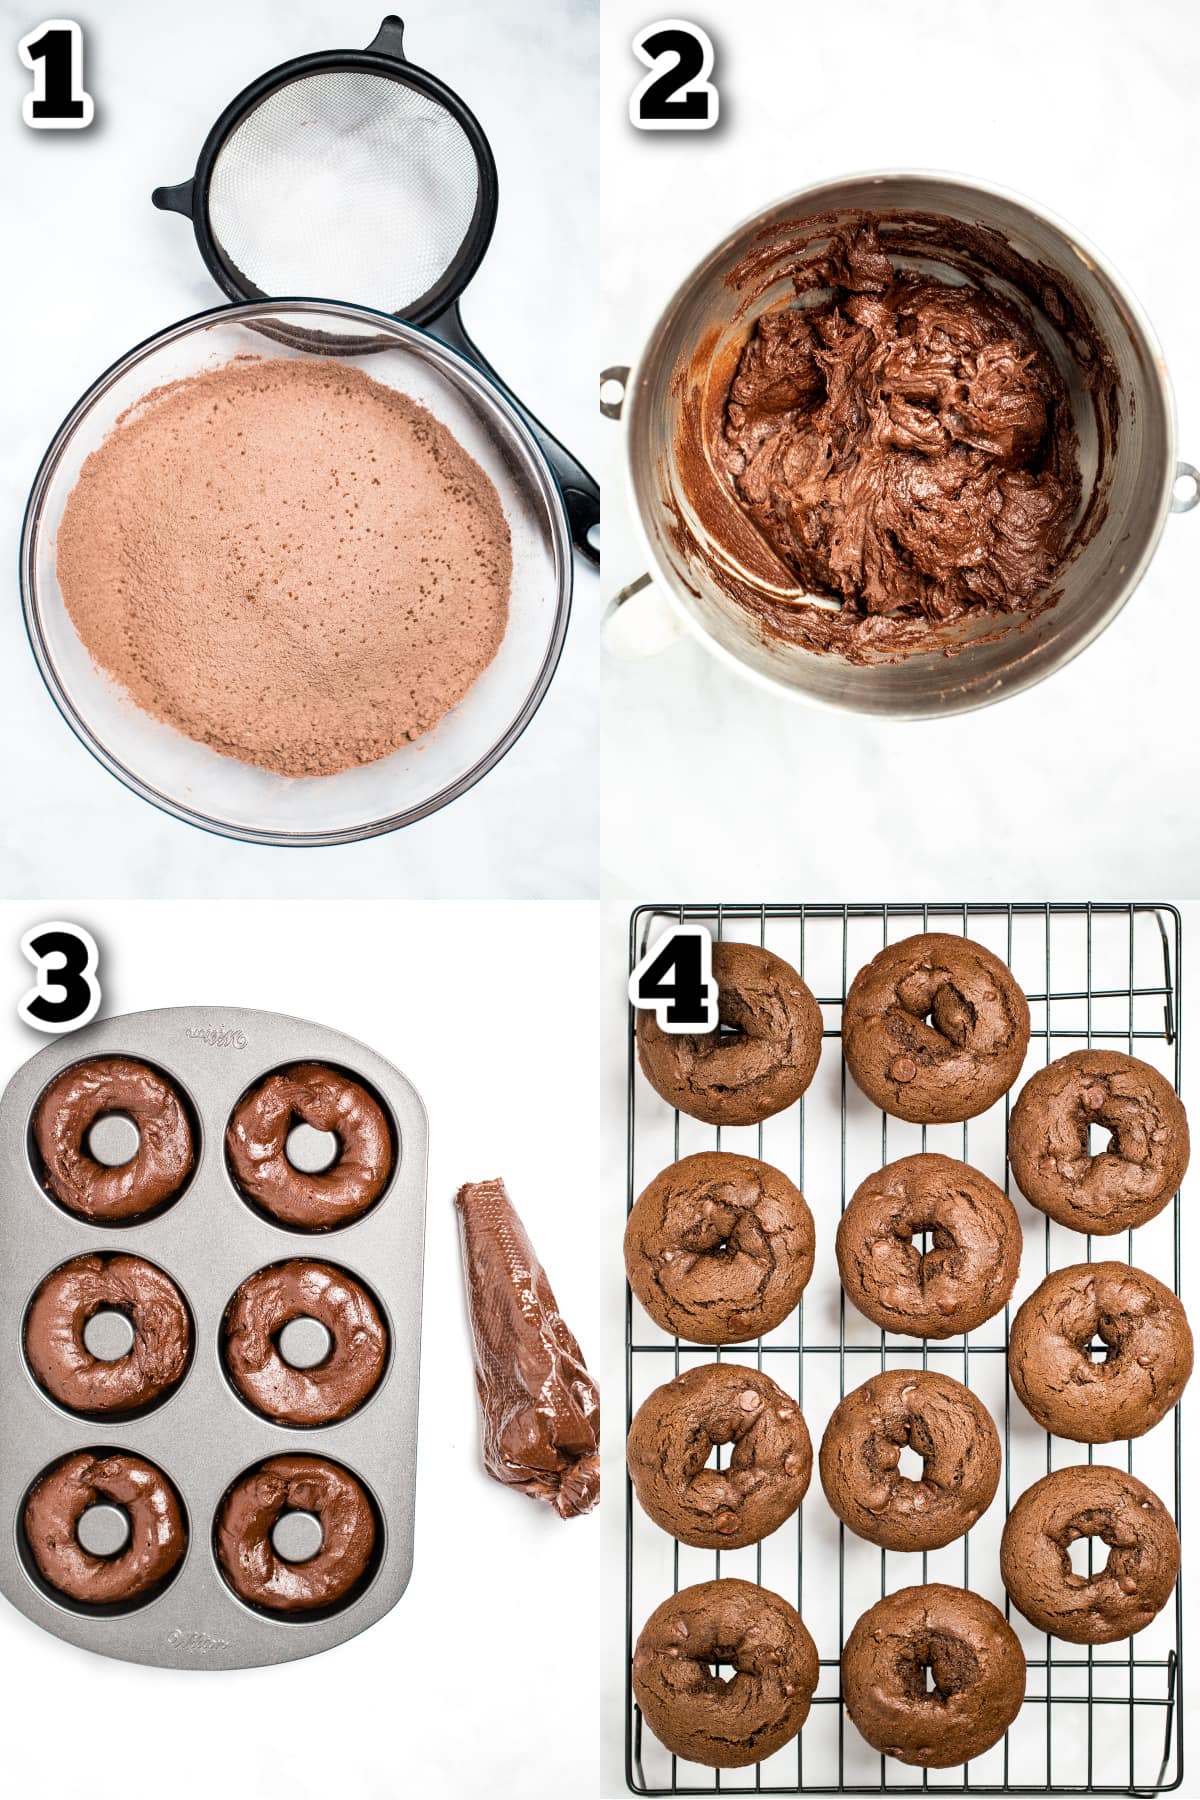 Step by step photos of how to make chocolate donuts.